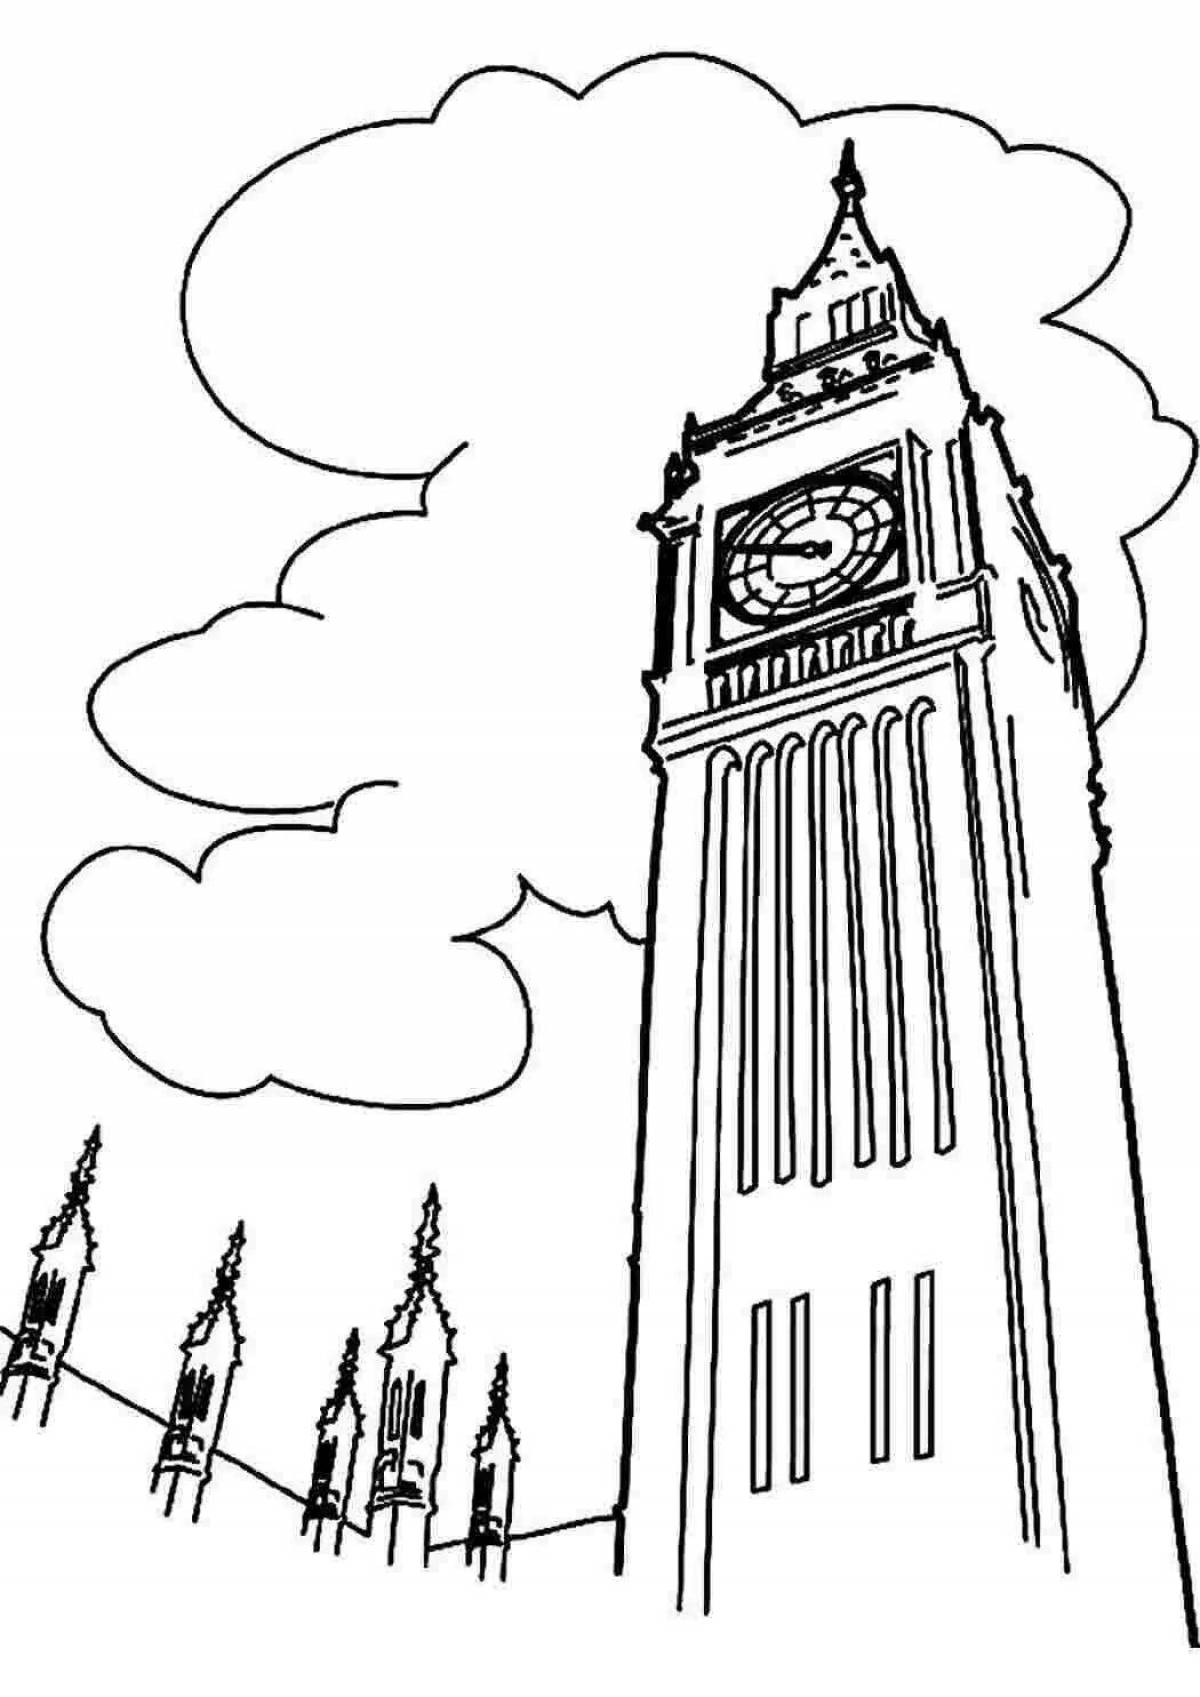 Rowdy London coloring pages for kids